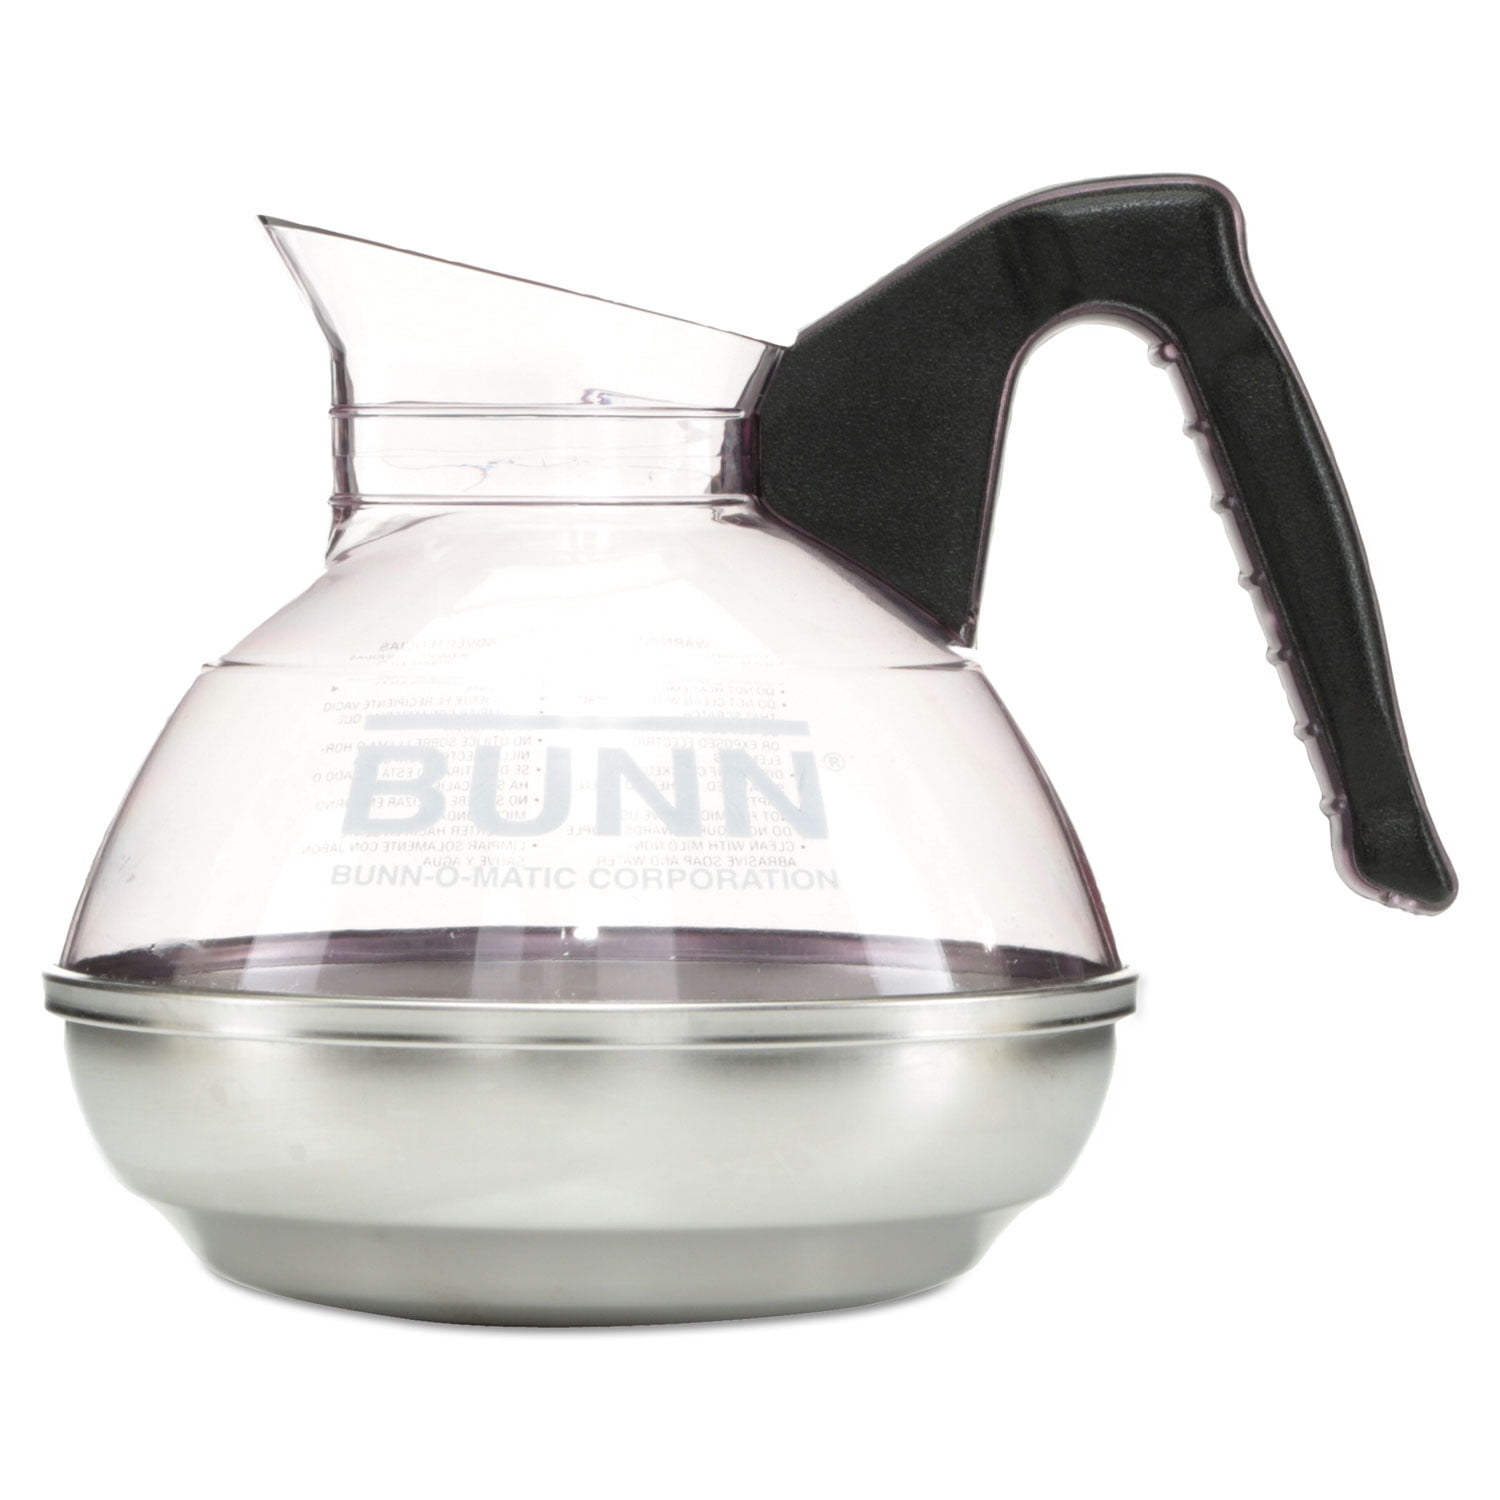 Bunn coffee maker 10 cup glass decanter carafe 4-5/8 high - household  items - by owner - housewares sale - craigslist